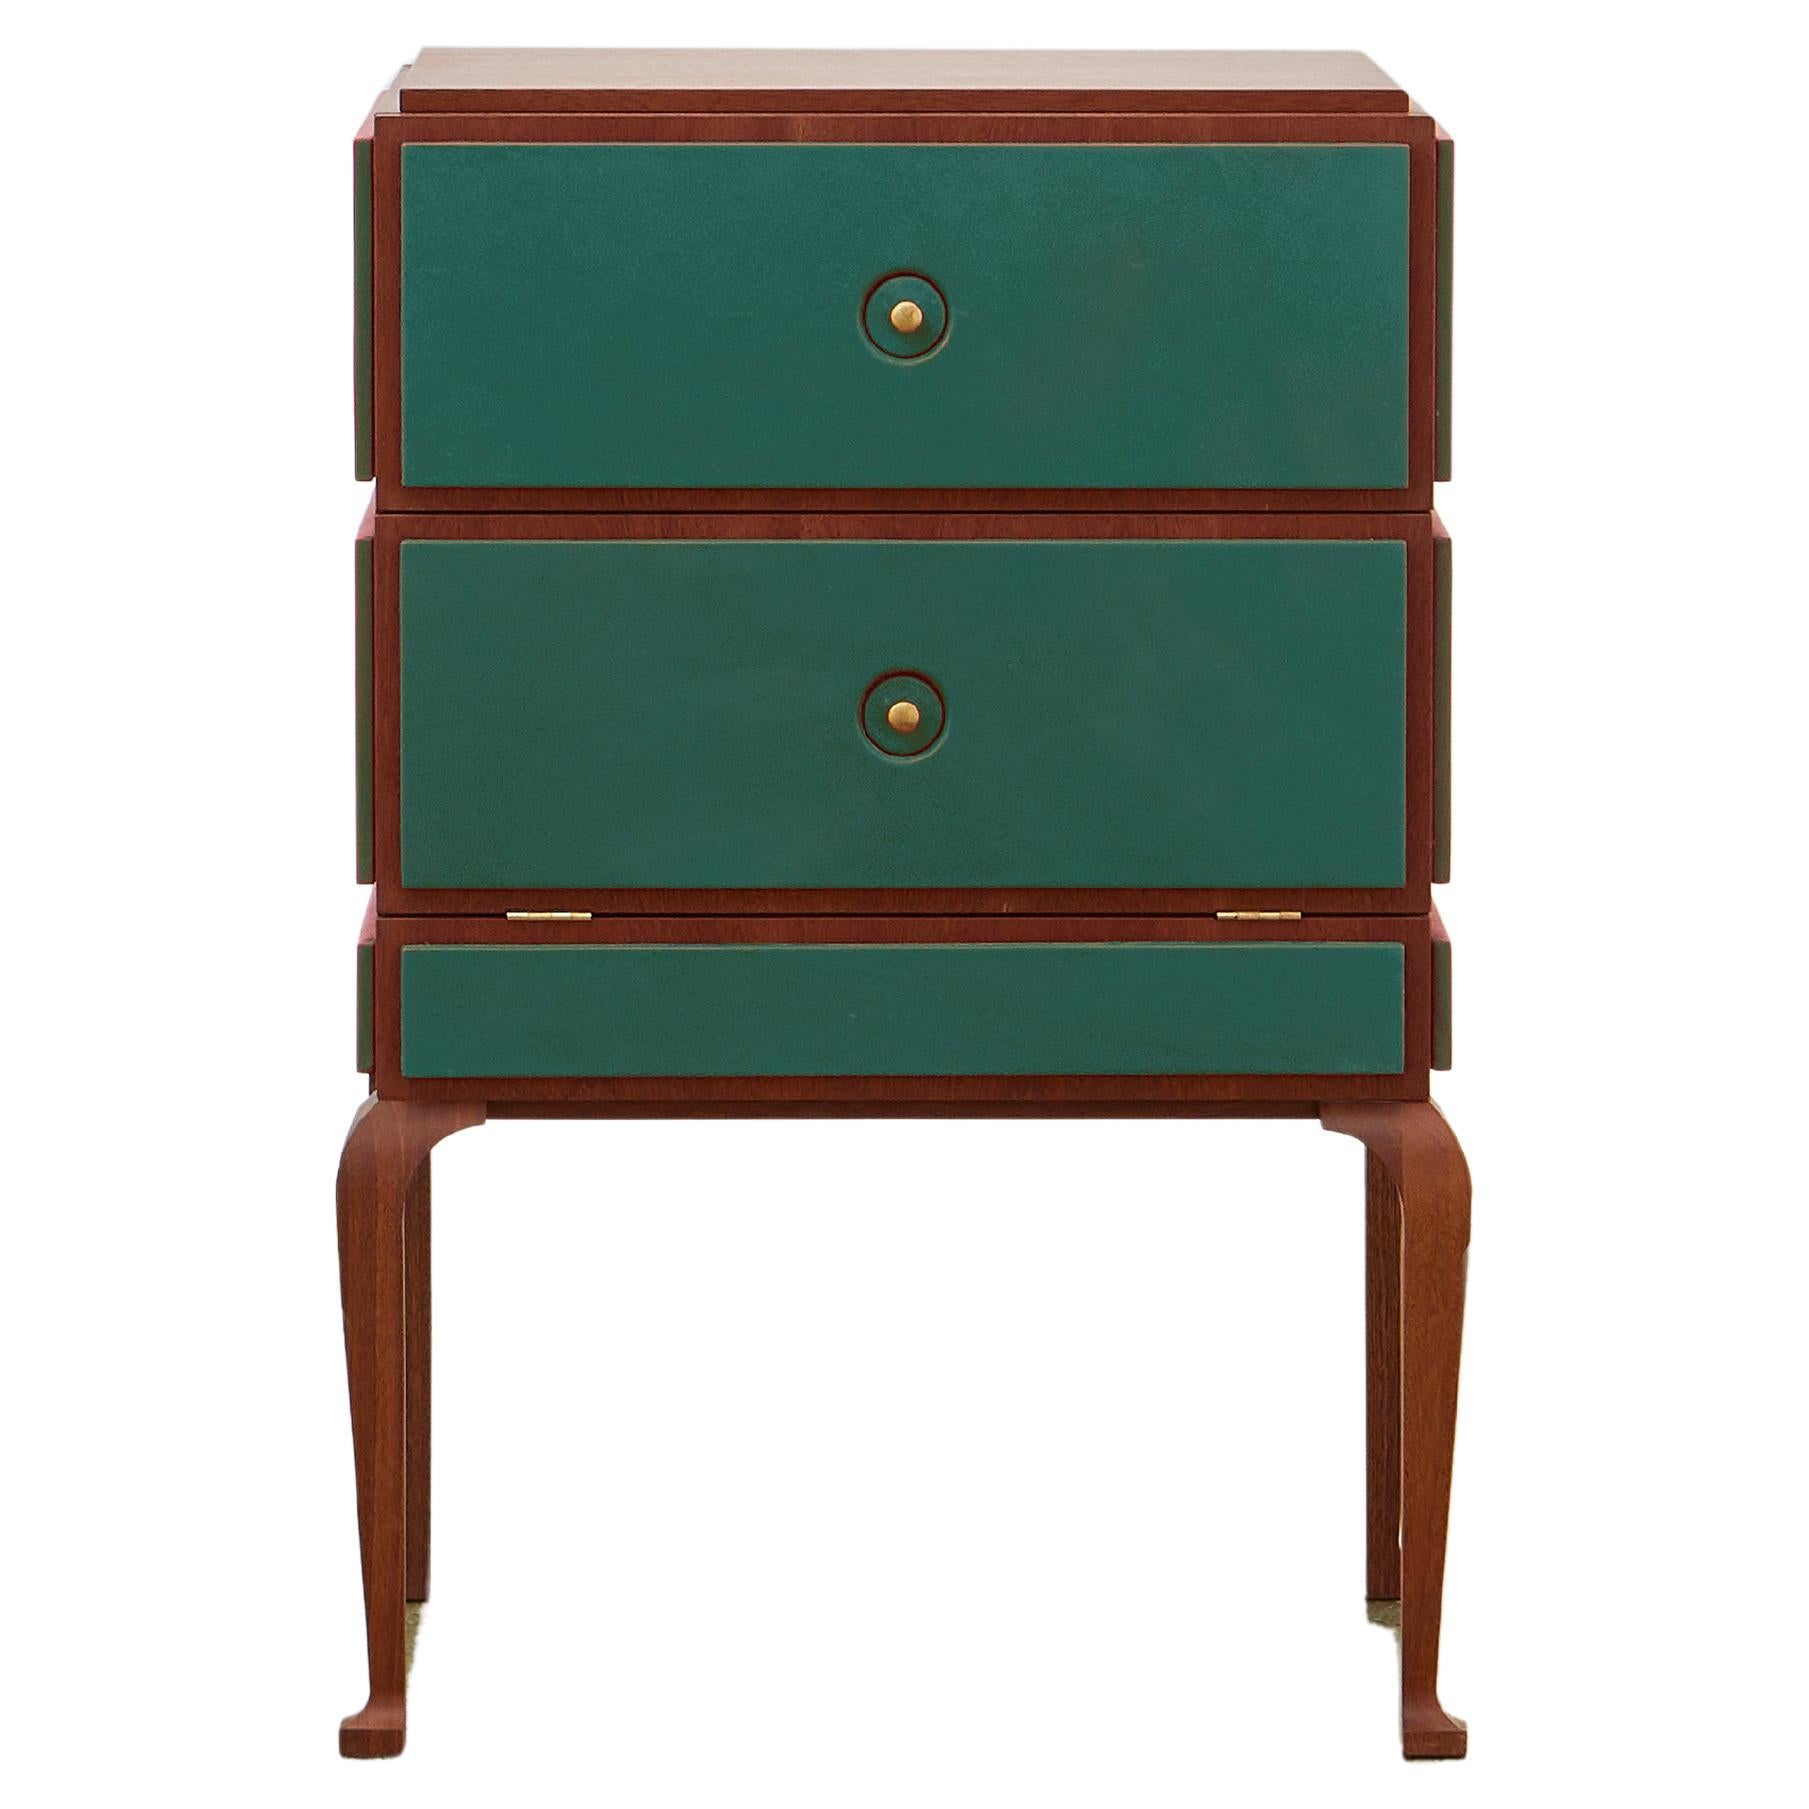 PH Small Drawer Chest, Mahogany, Emerald Green Leather, Wood legs, Ash Drawers